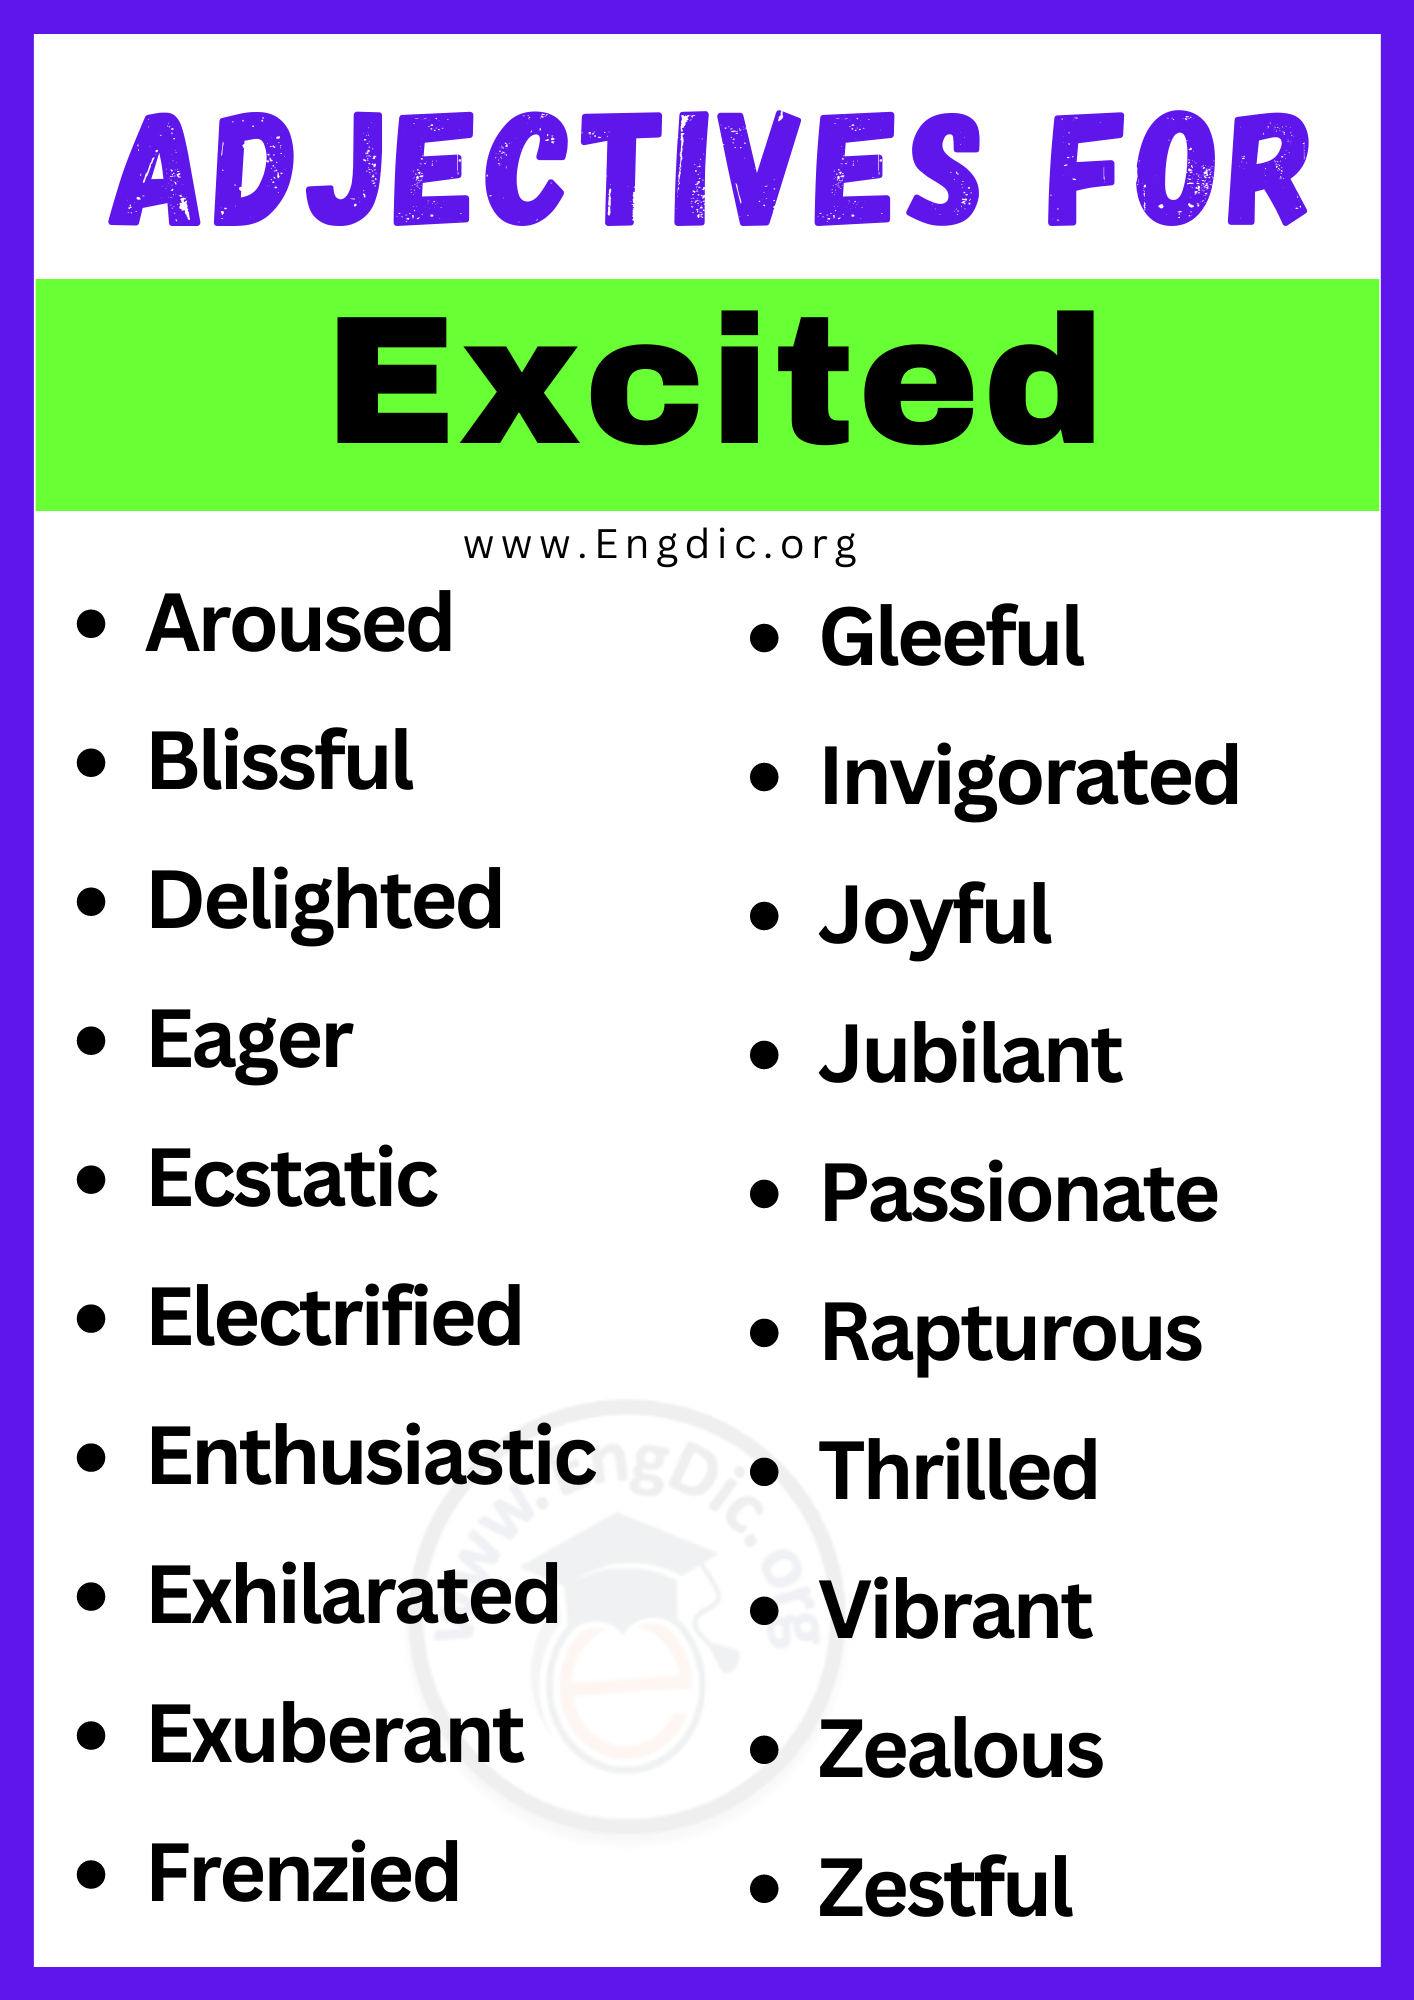 Adjectives for Excited